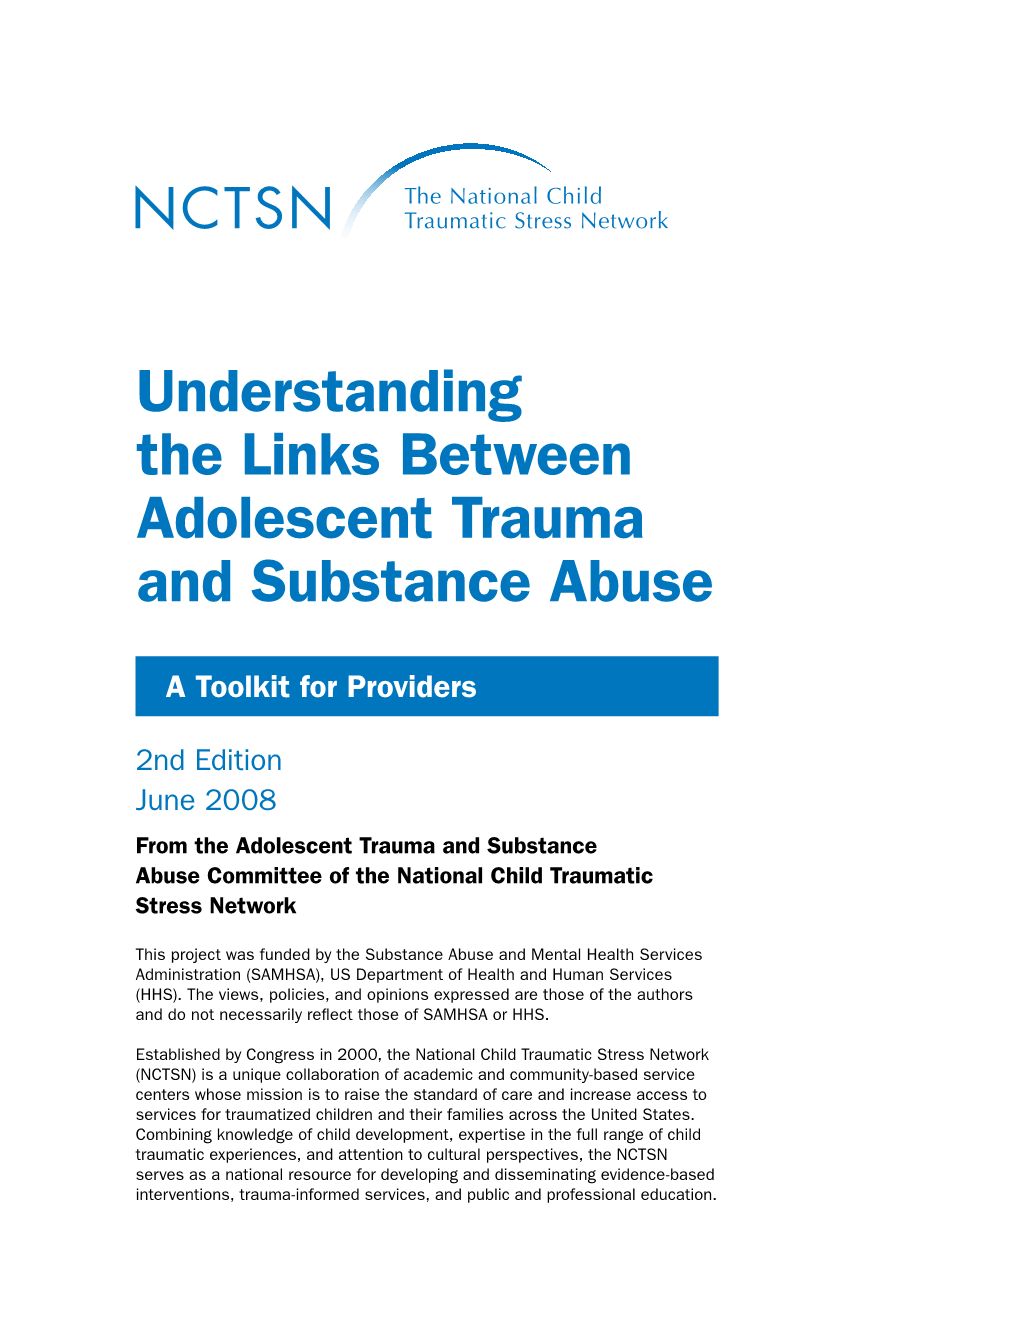 Understanding the Links Between Adolescent Trauma and Substance Abuse